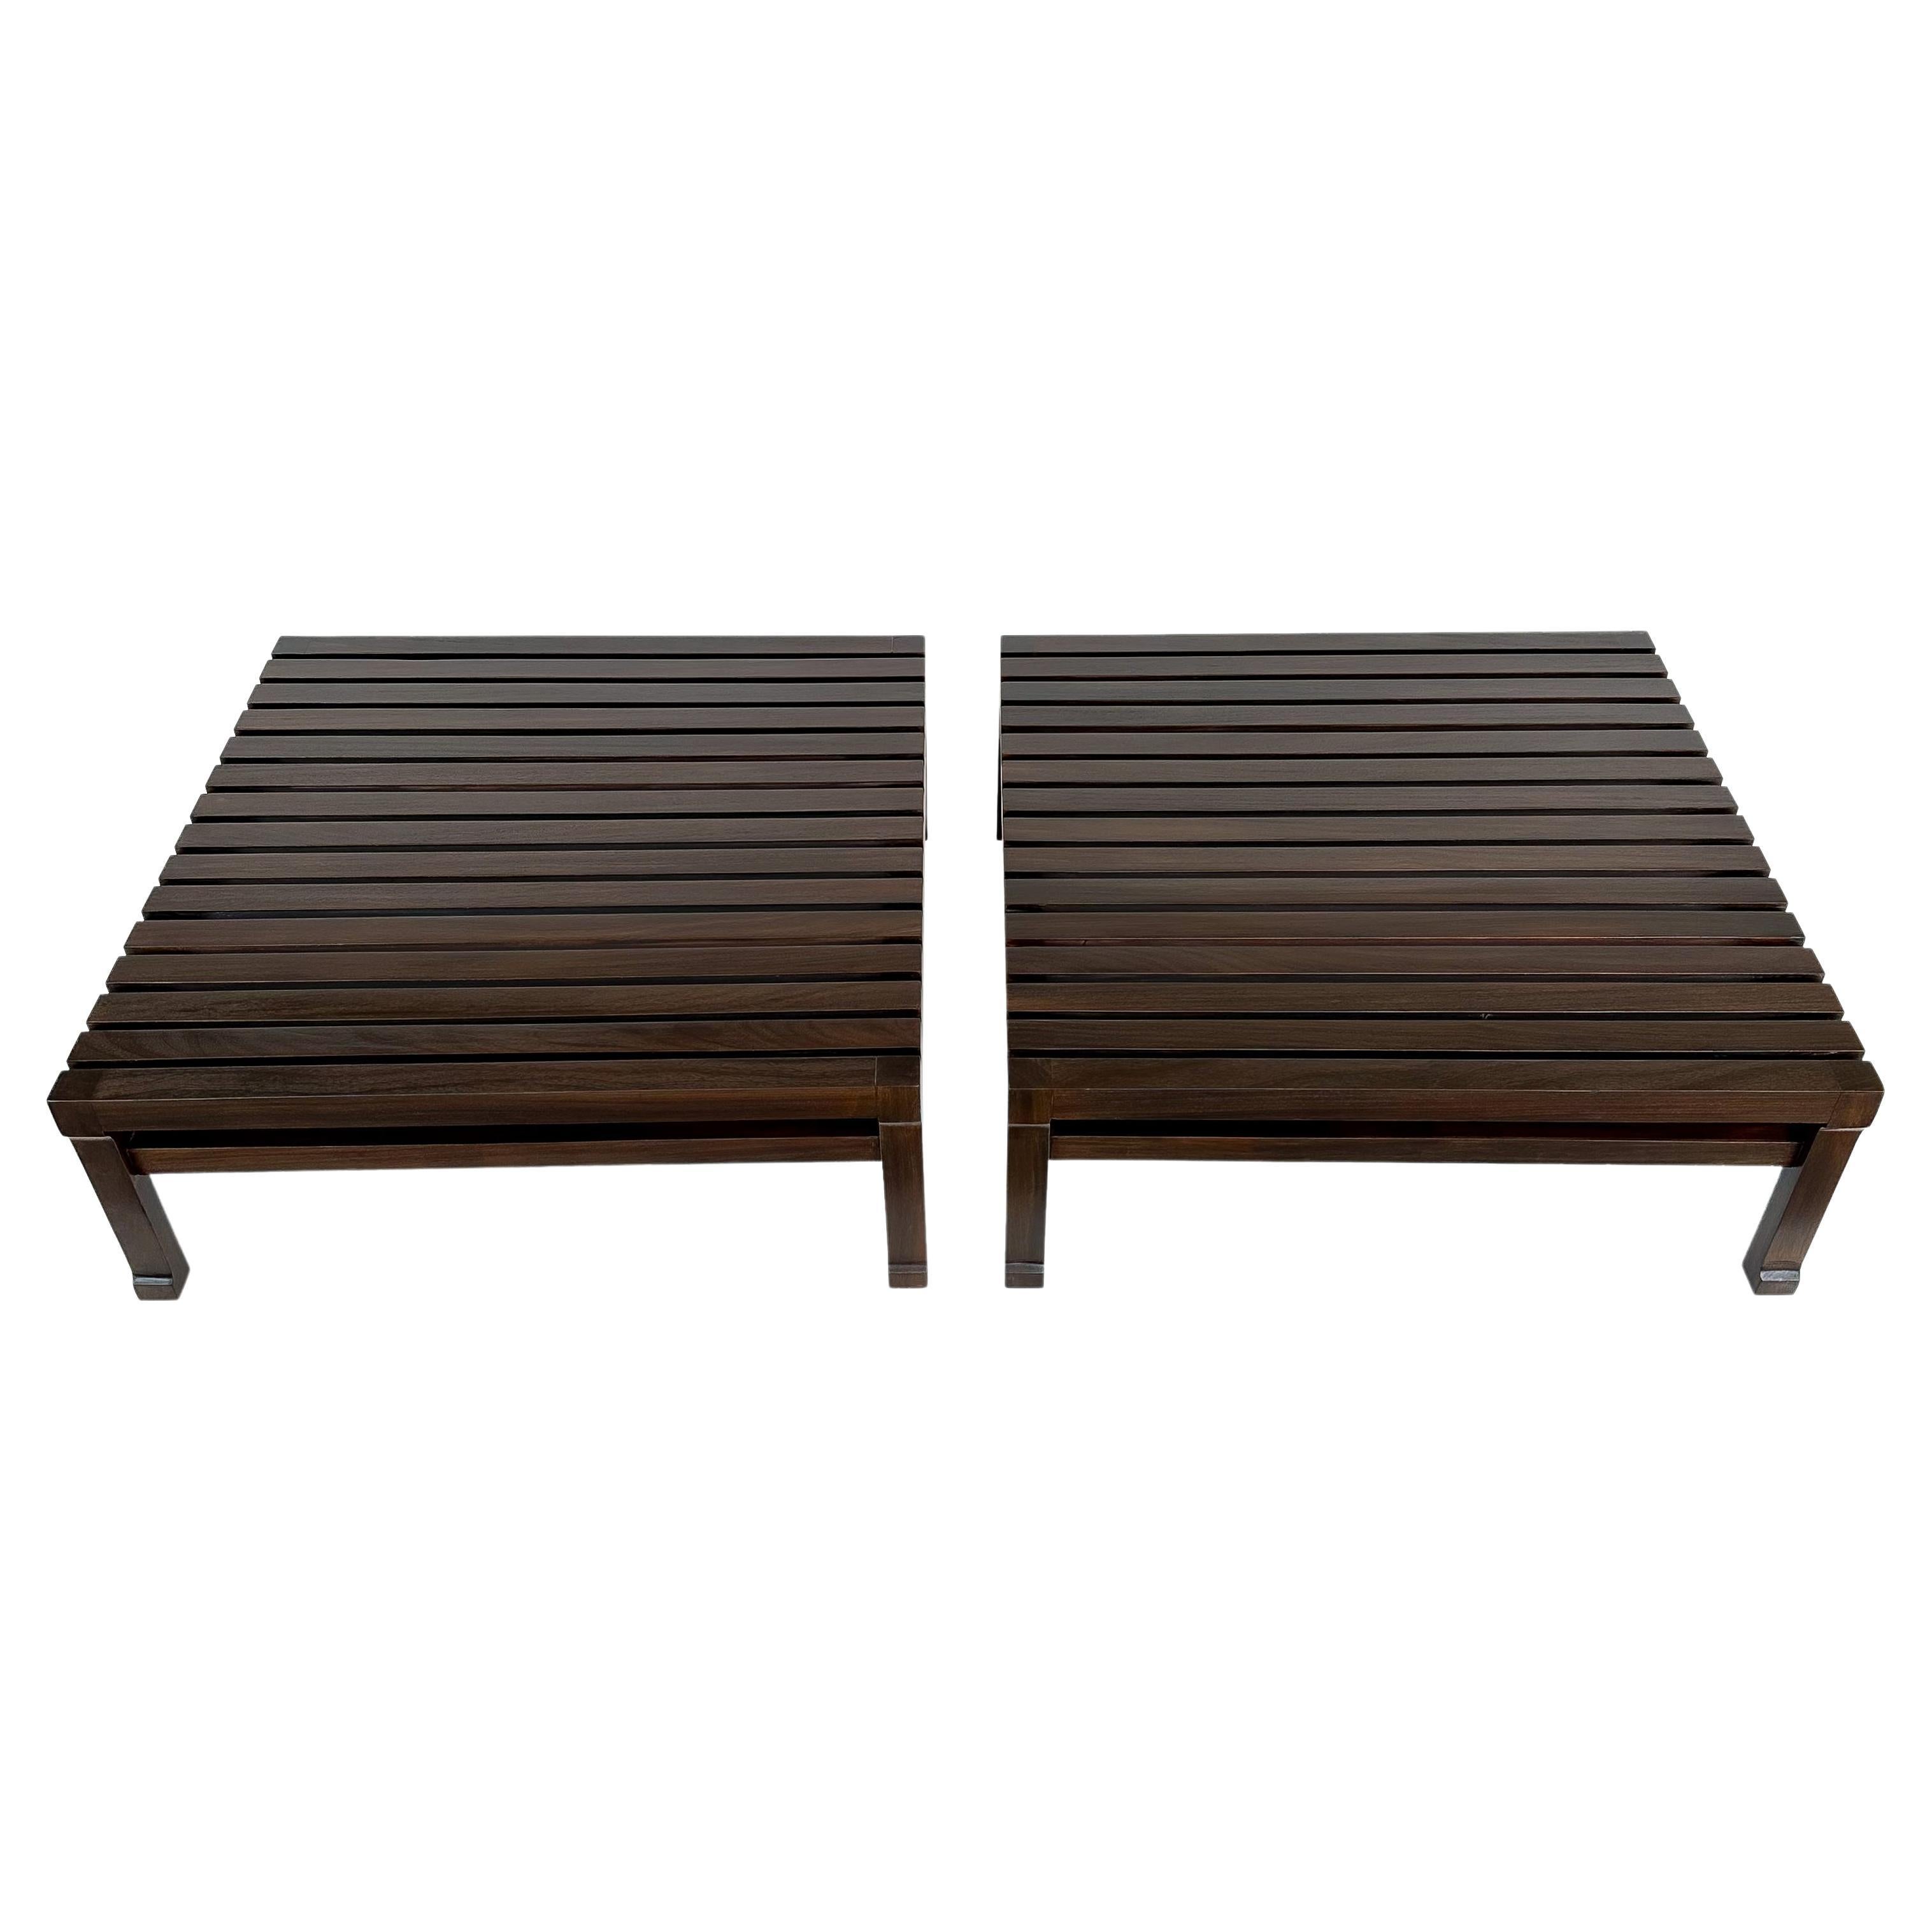 Pair of Italian Low Slatted End Tables or Coffee Tables